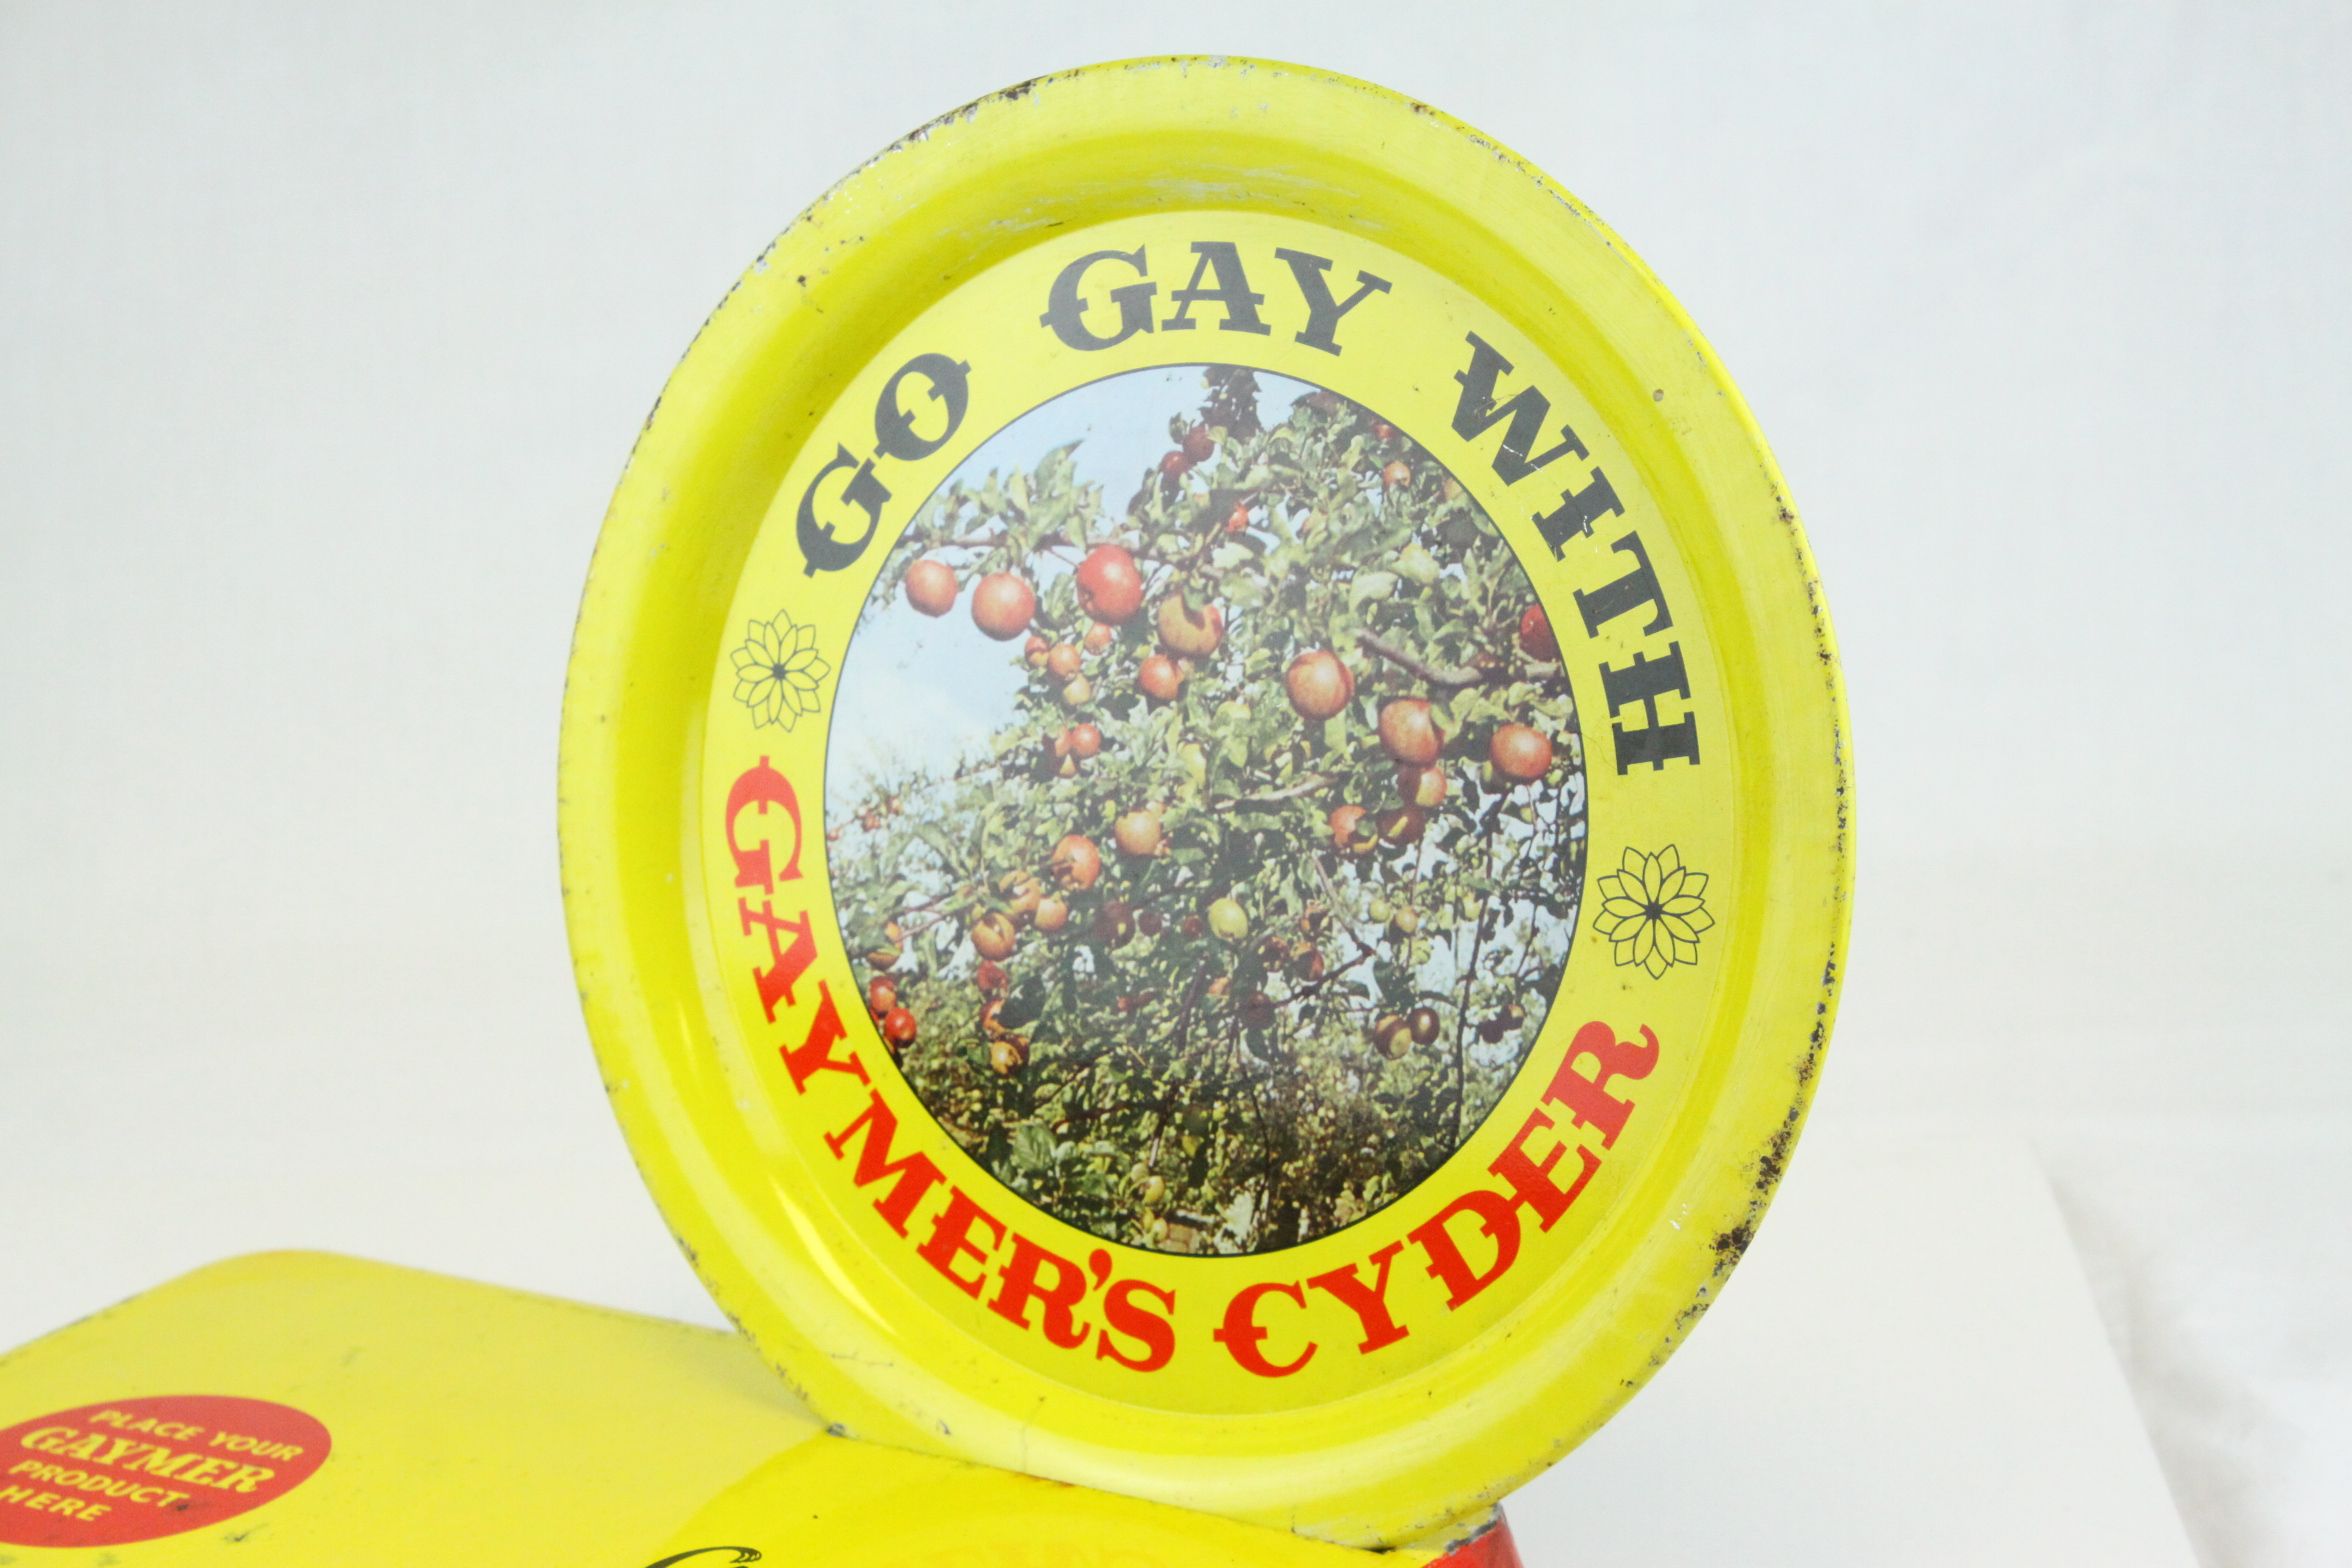 Retro / Vintage Advertising Pub Tray which inserts into a Stand for placing a Glass ' Go Gay with - Image 2 of 4